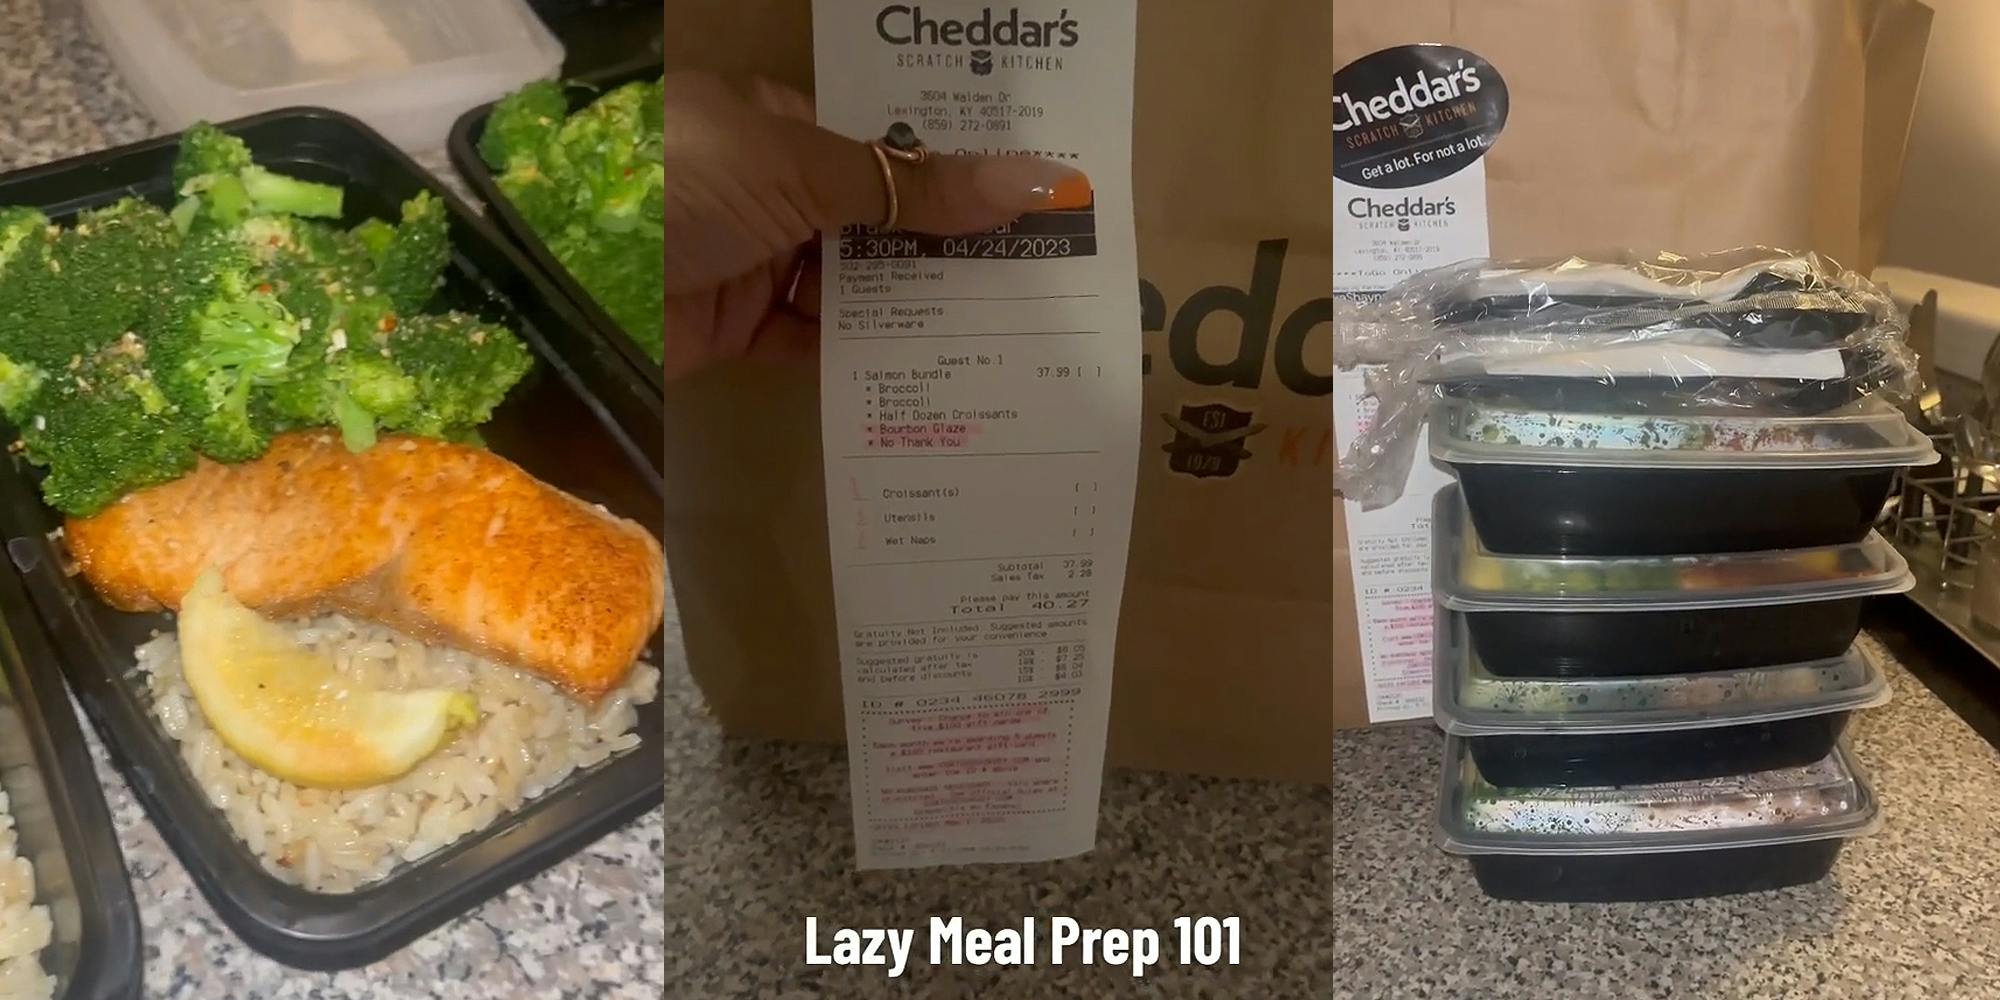 salmon with rice and broccoli in meal prep container (l) Cheddar's bag with food inside and receipt with caption "Lazy Meal Prep 101" (c) 4 prepped meals in containers on counter (r)